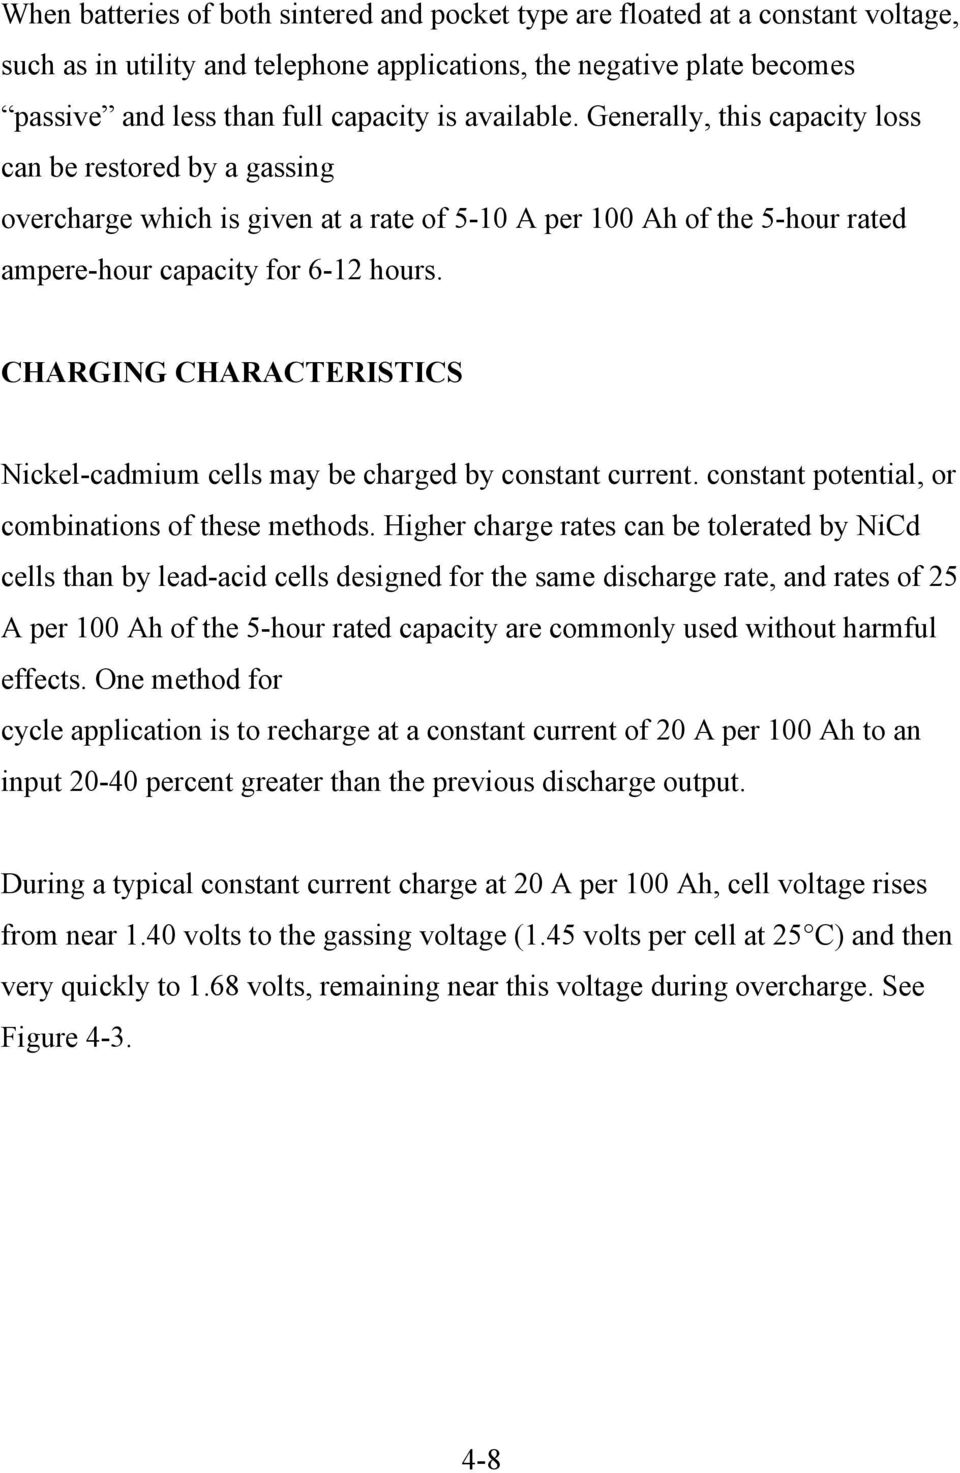 CHARGING CHARACTERISTICS Nickel-cadmium cells may be charged by constant current. constant potential, or combinations of these methods.